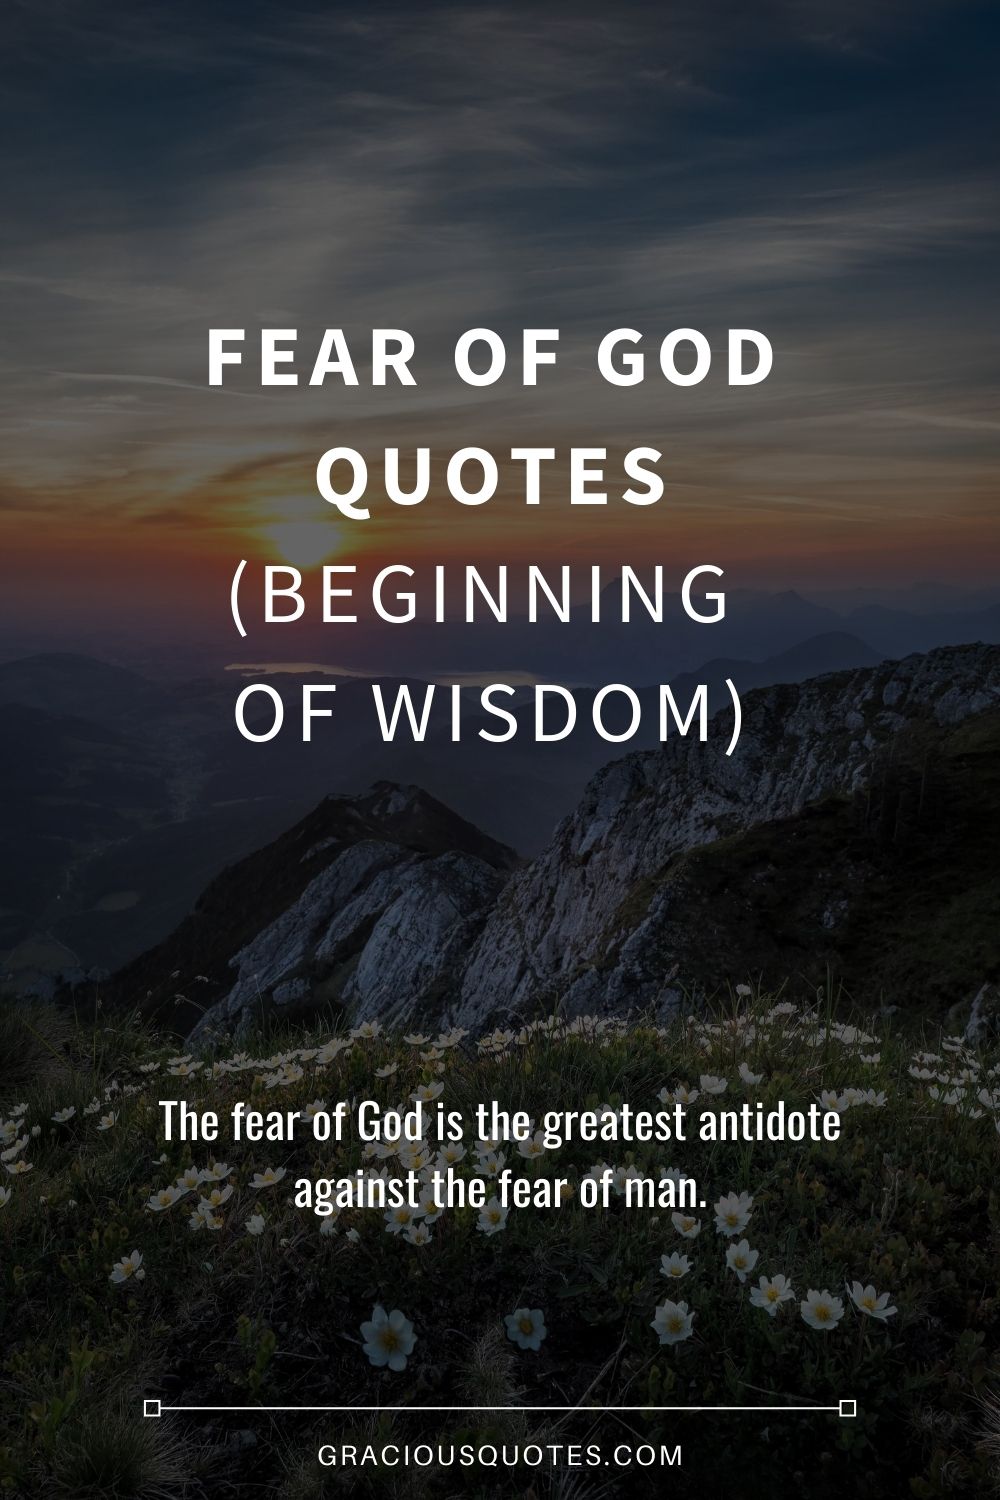 Fear of God Quotes (BEGINNING OF WISDOM) - Gracious Quotes